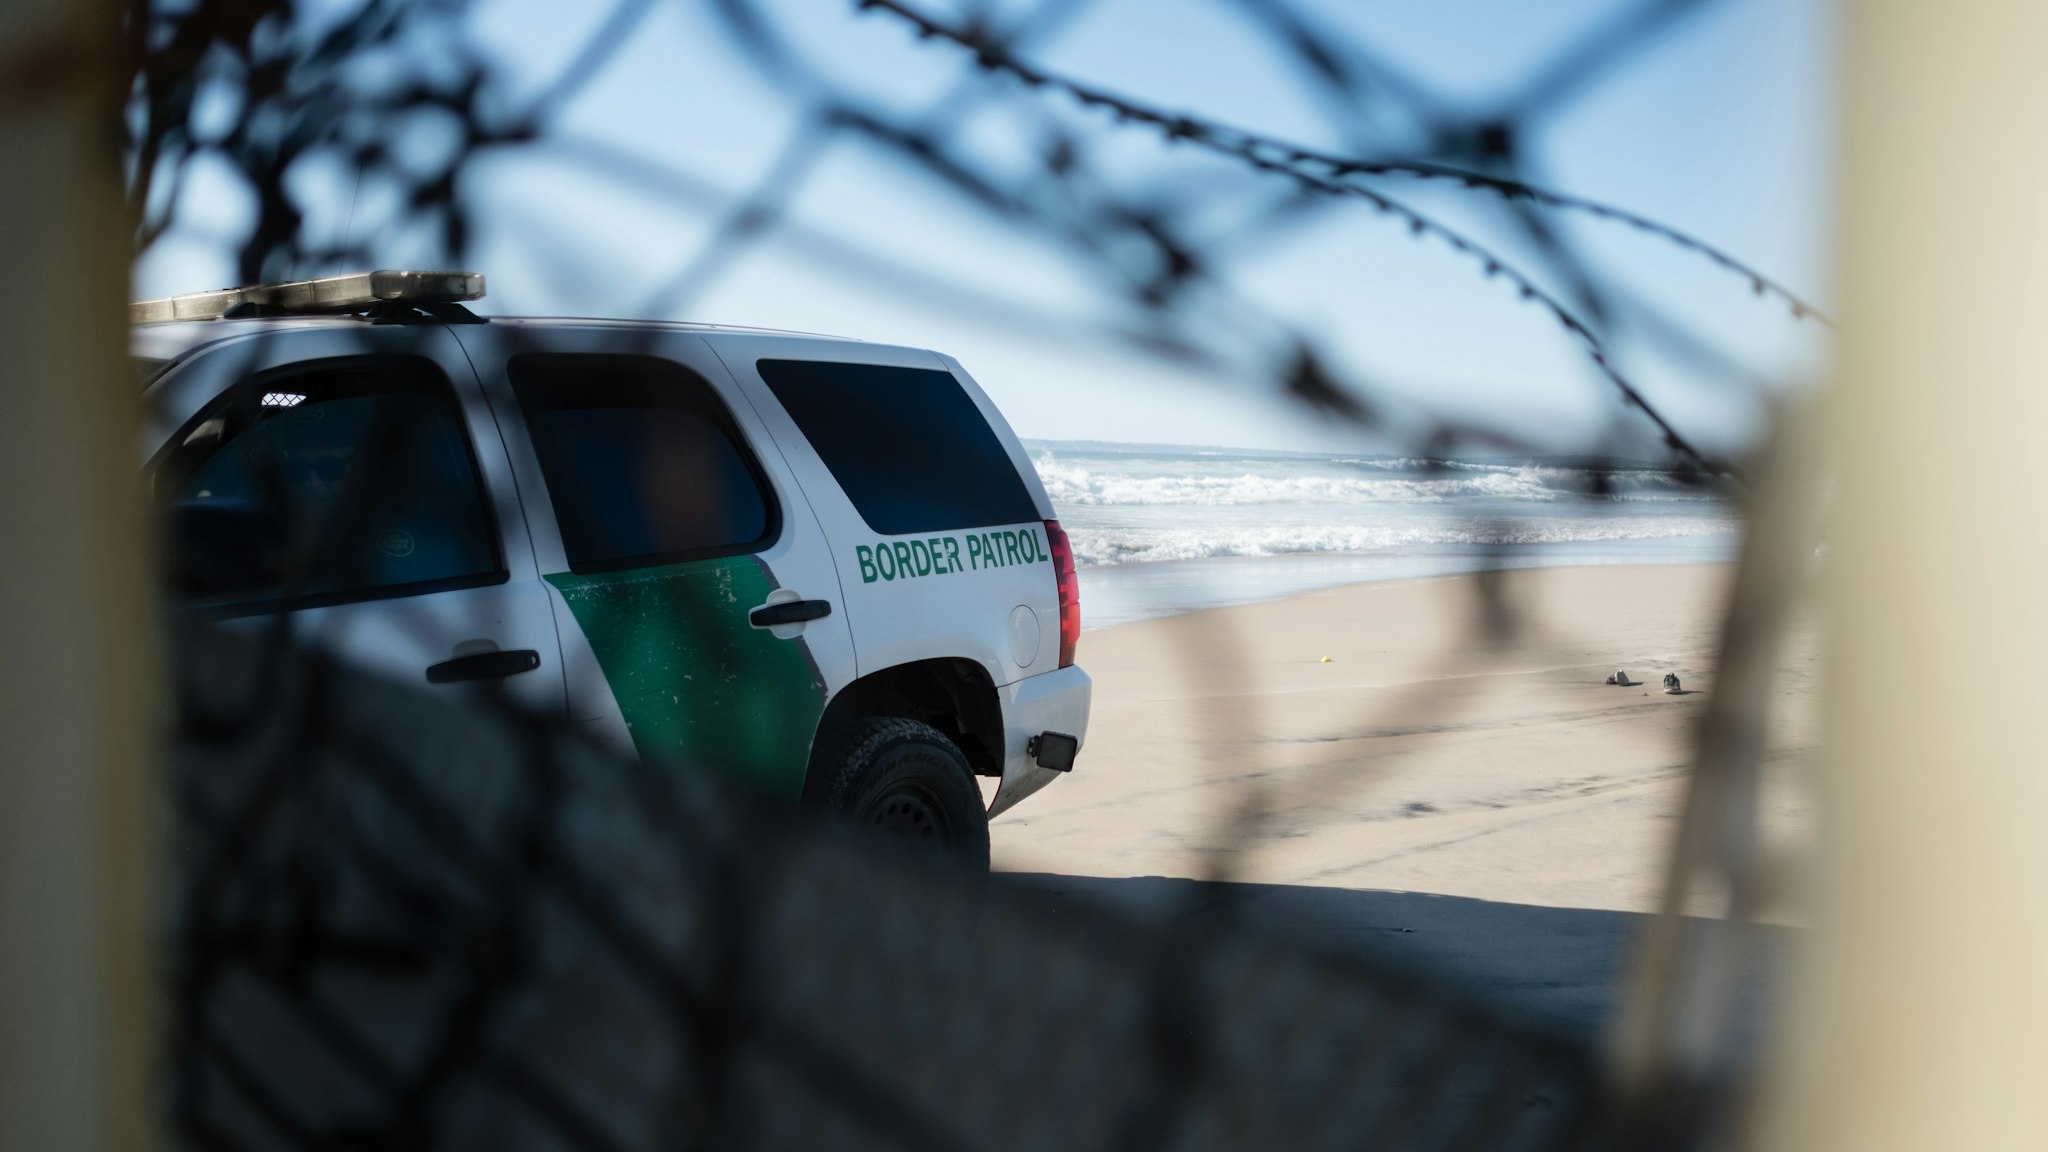 TIJUANA, BAJA CALIFORNIA, MEXICO - 2019/03/13: United States Border Patrol is seen blocking the wall at the US-Mexico border after a large group cut through the wall , fleeing to United States. In February 2019, around 76,000 fled from the southern border into the United states in order to find a better live. (Photo by Megan Jelinger/SOPA Images/LightRocket via Getty Images)